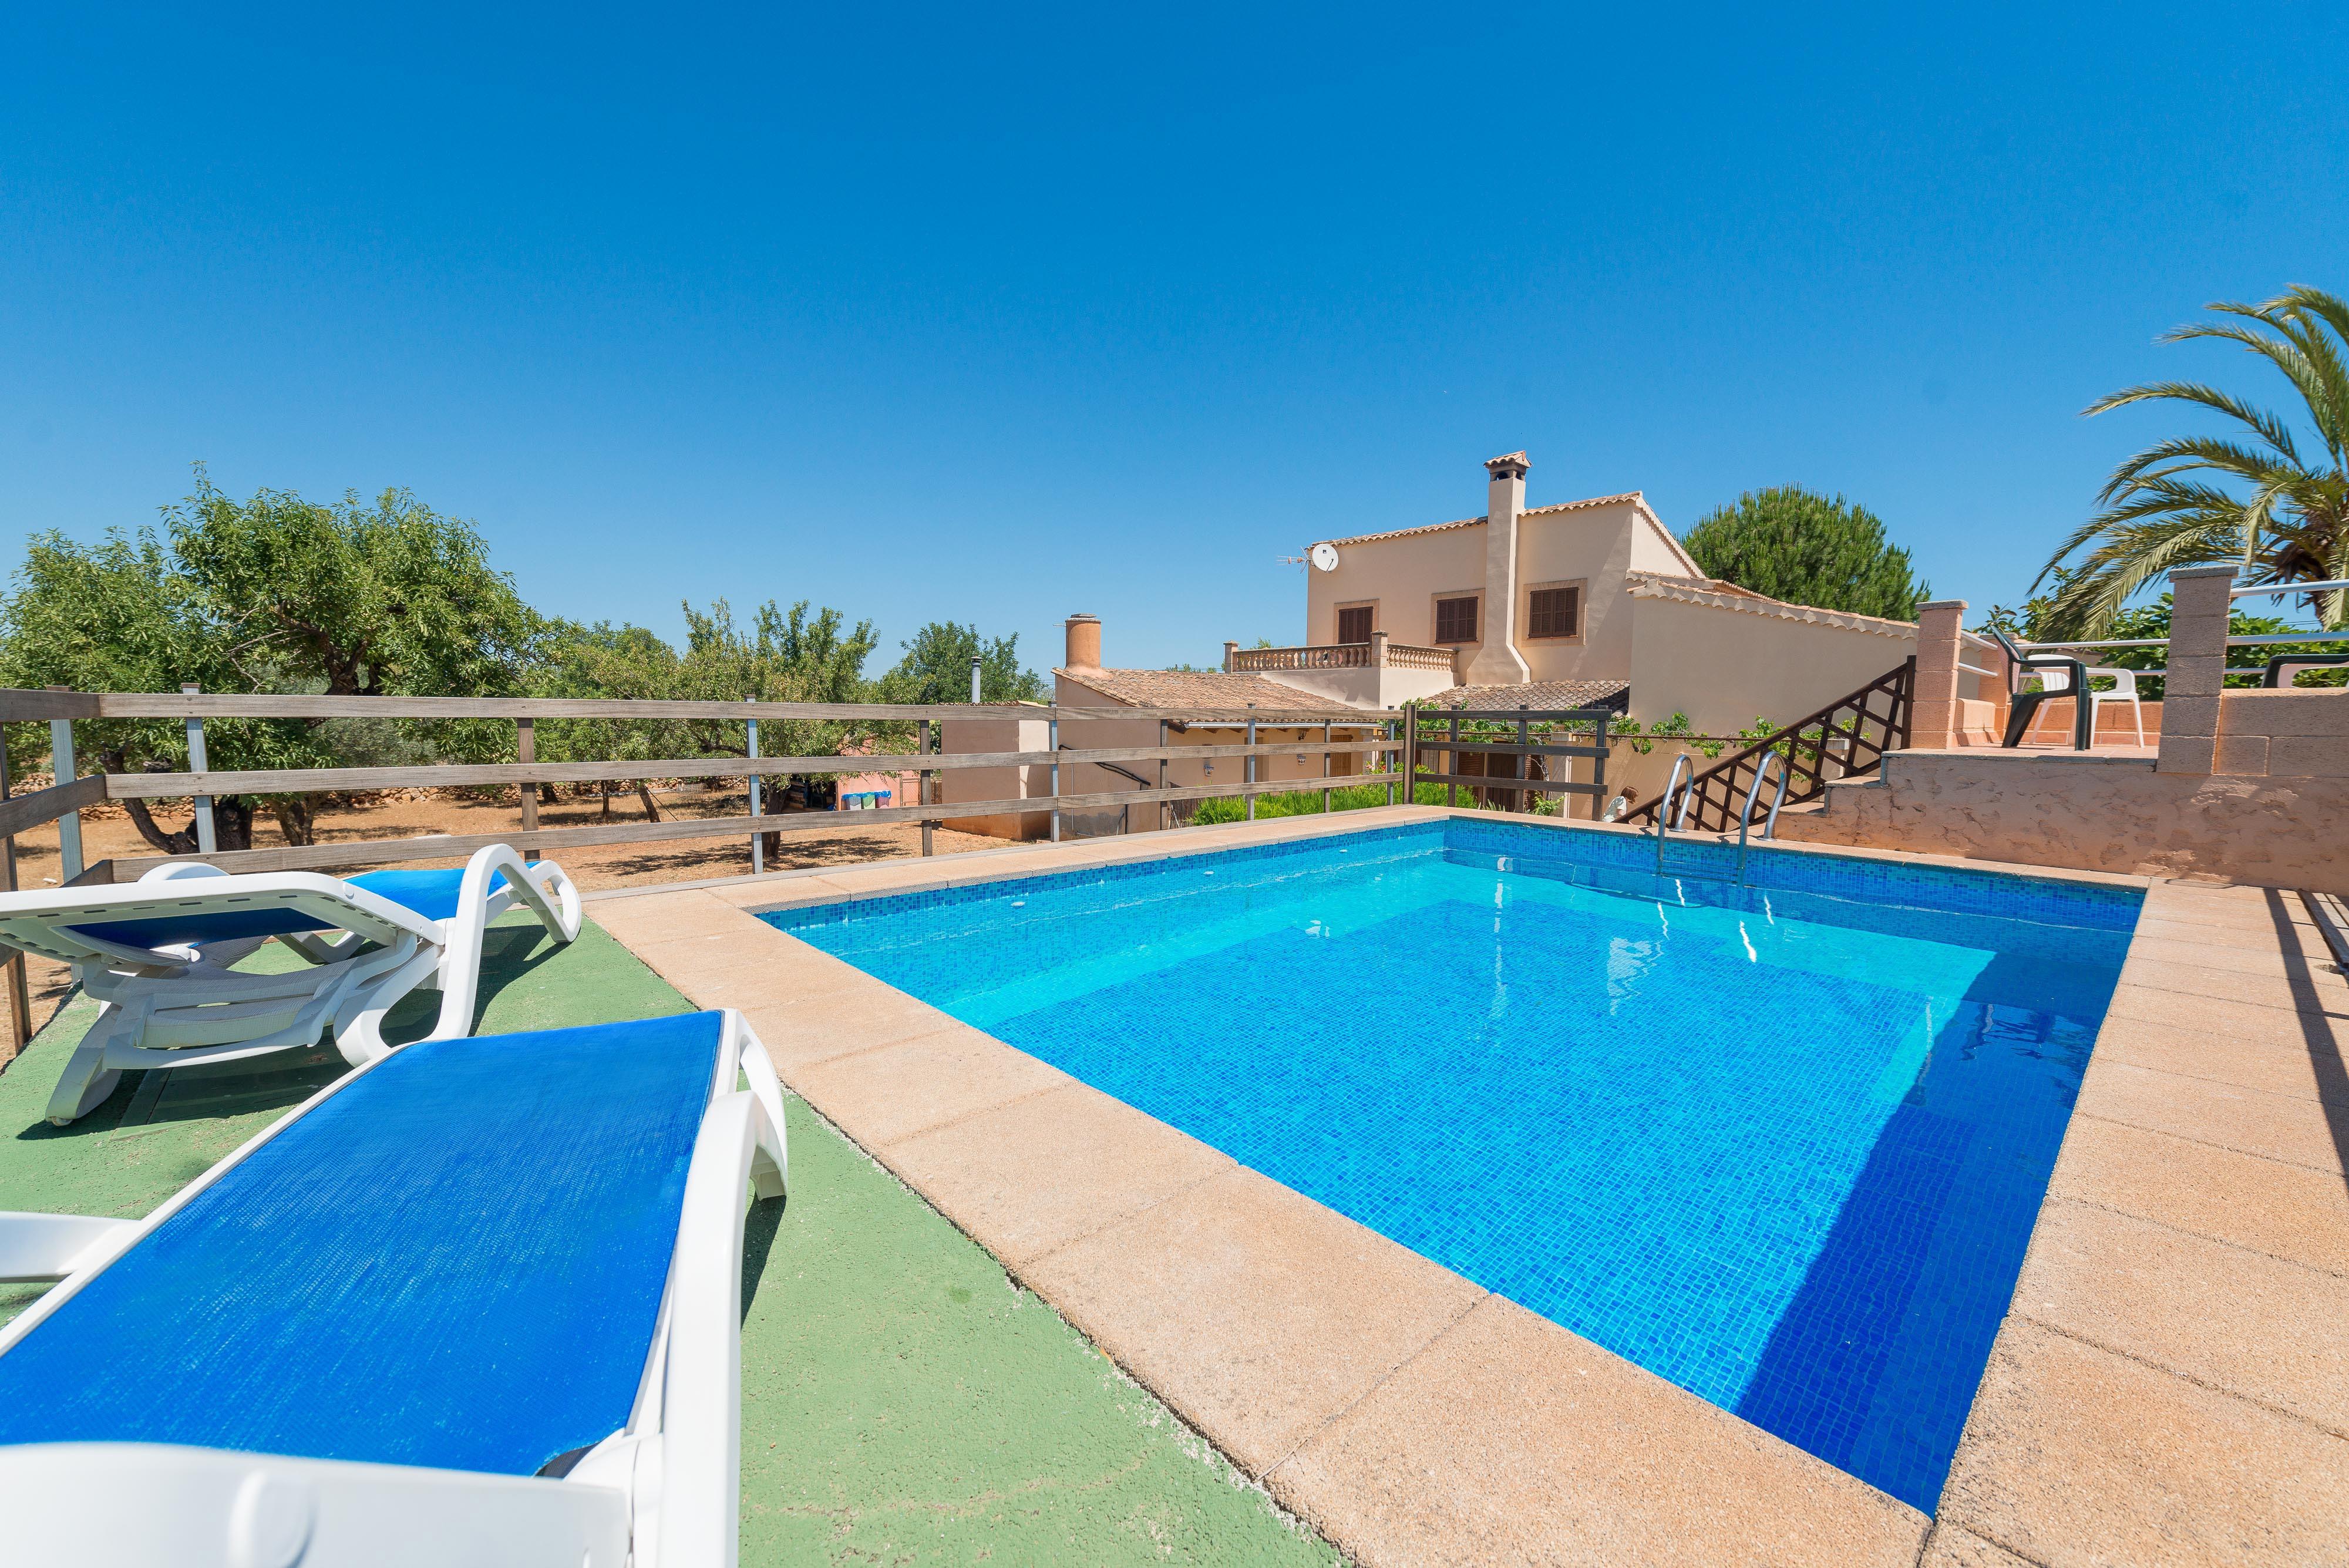 Property Image 1 - CLAU DE SOL - Great country house with private pool located 4 km from the beach. Free WiFi